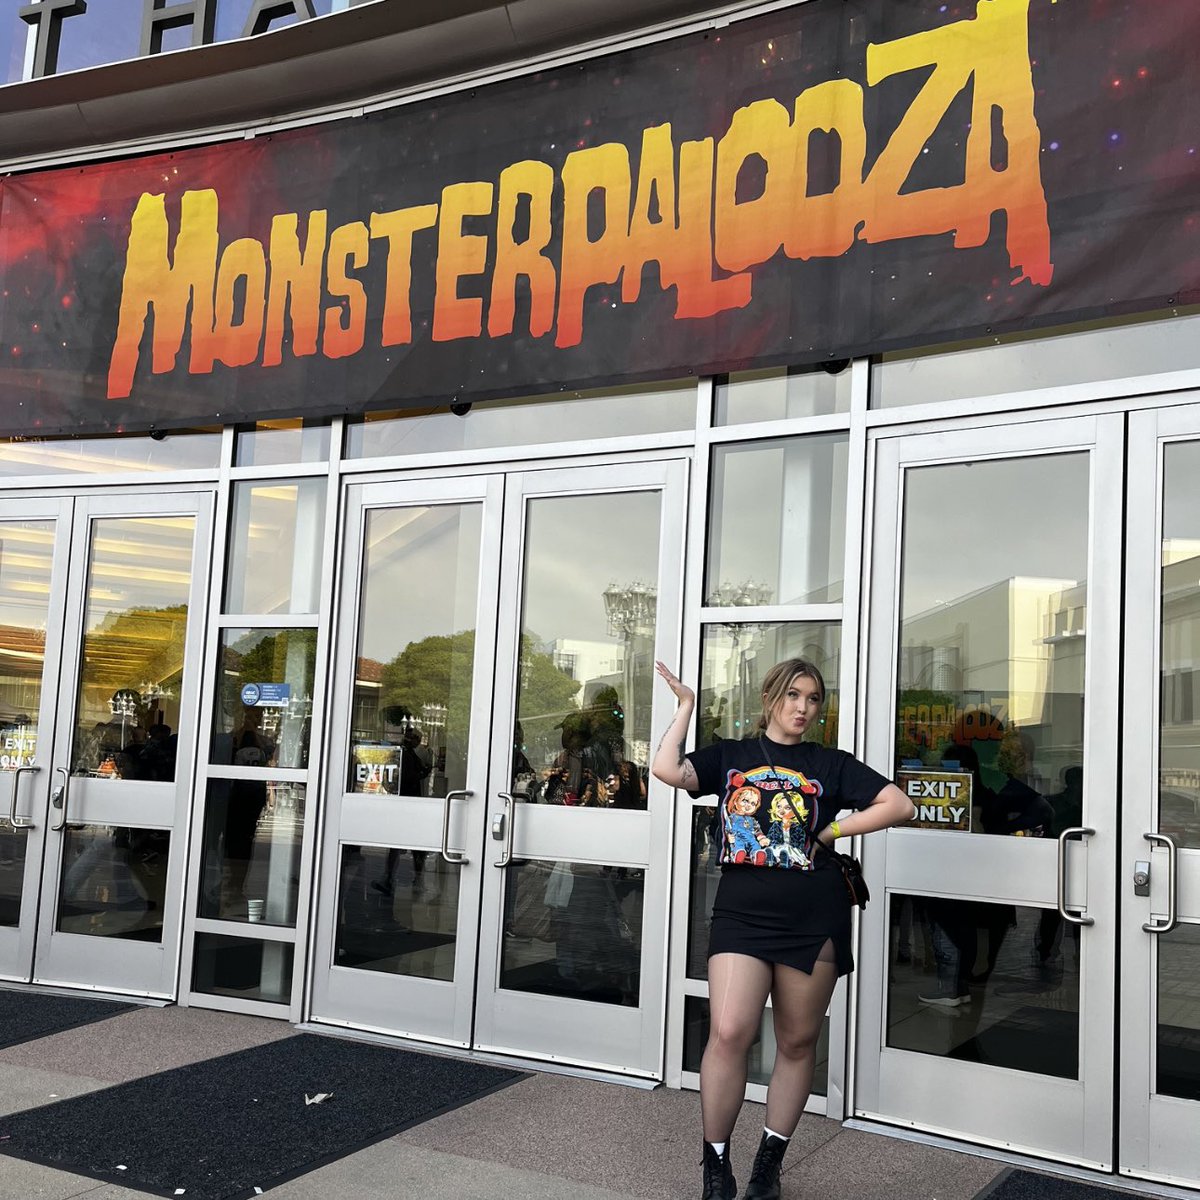 tb to monsterpalooza!!!! it’s been to long since going to a horror convention 🎃